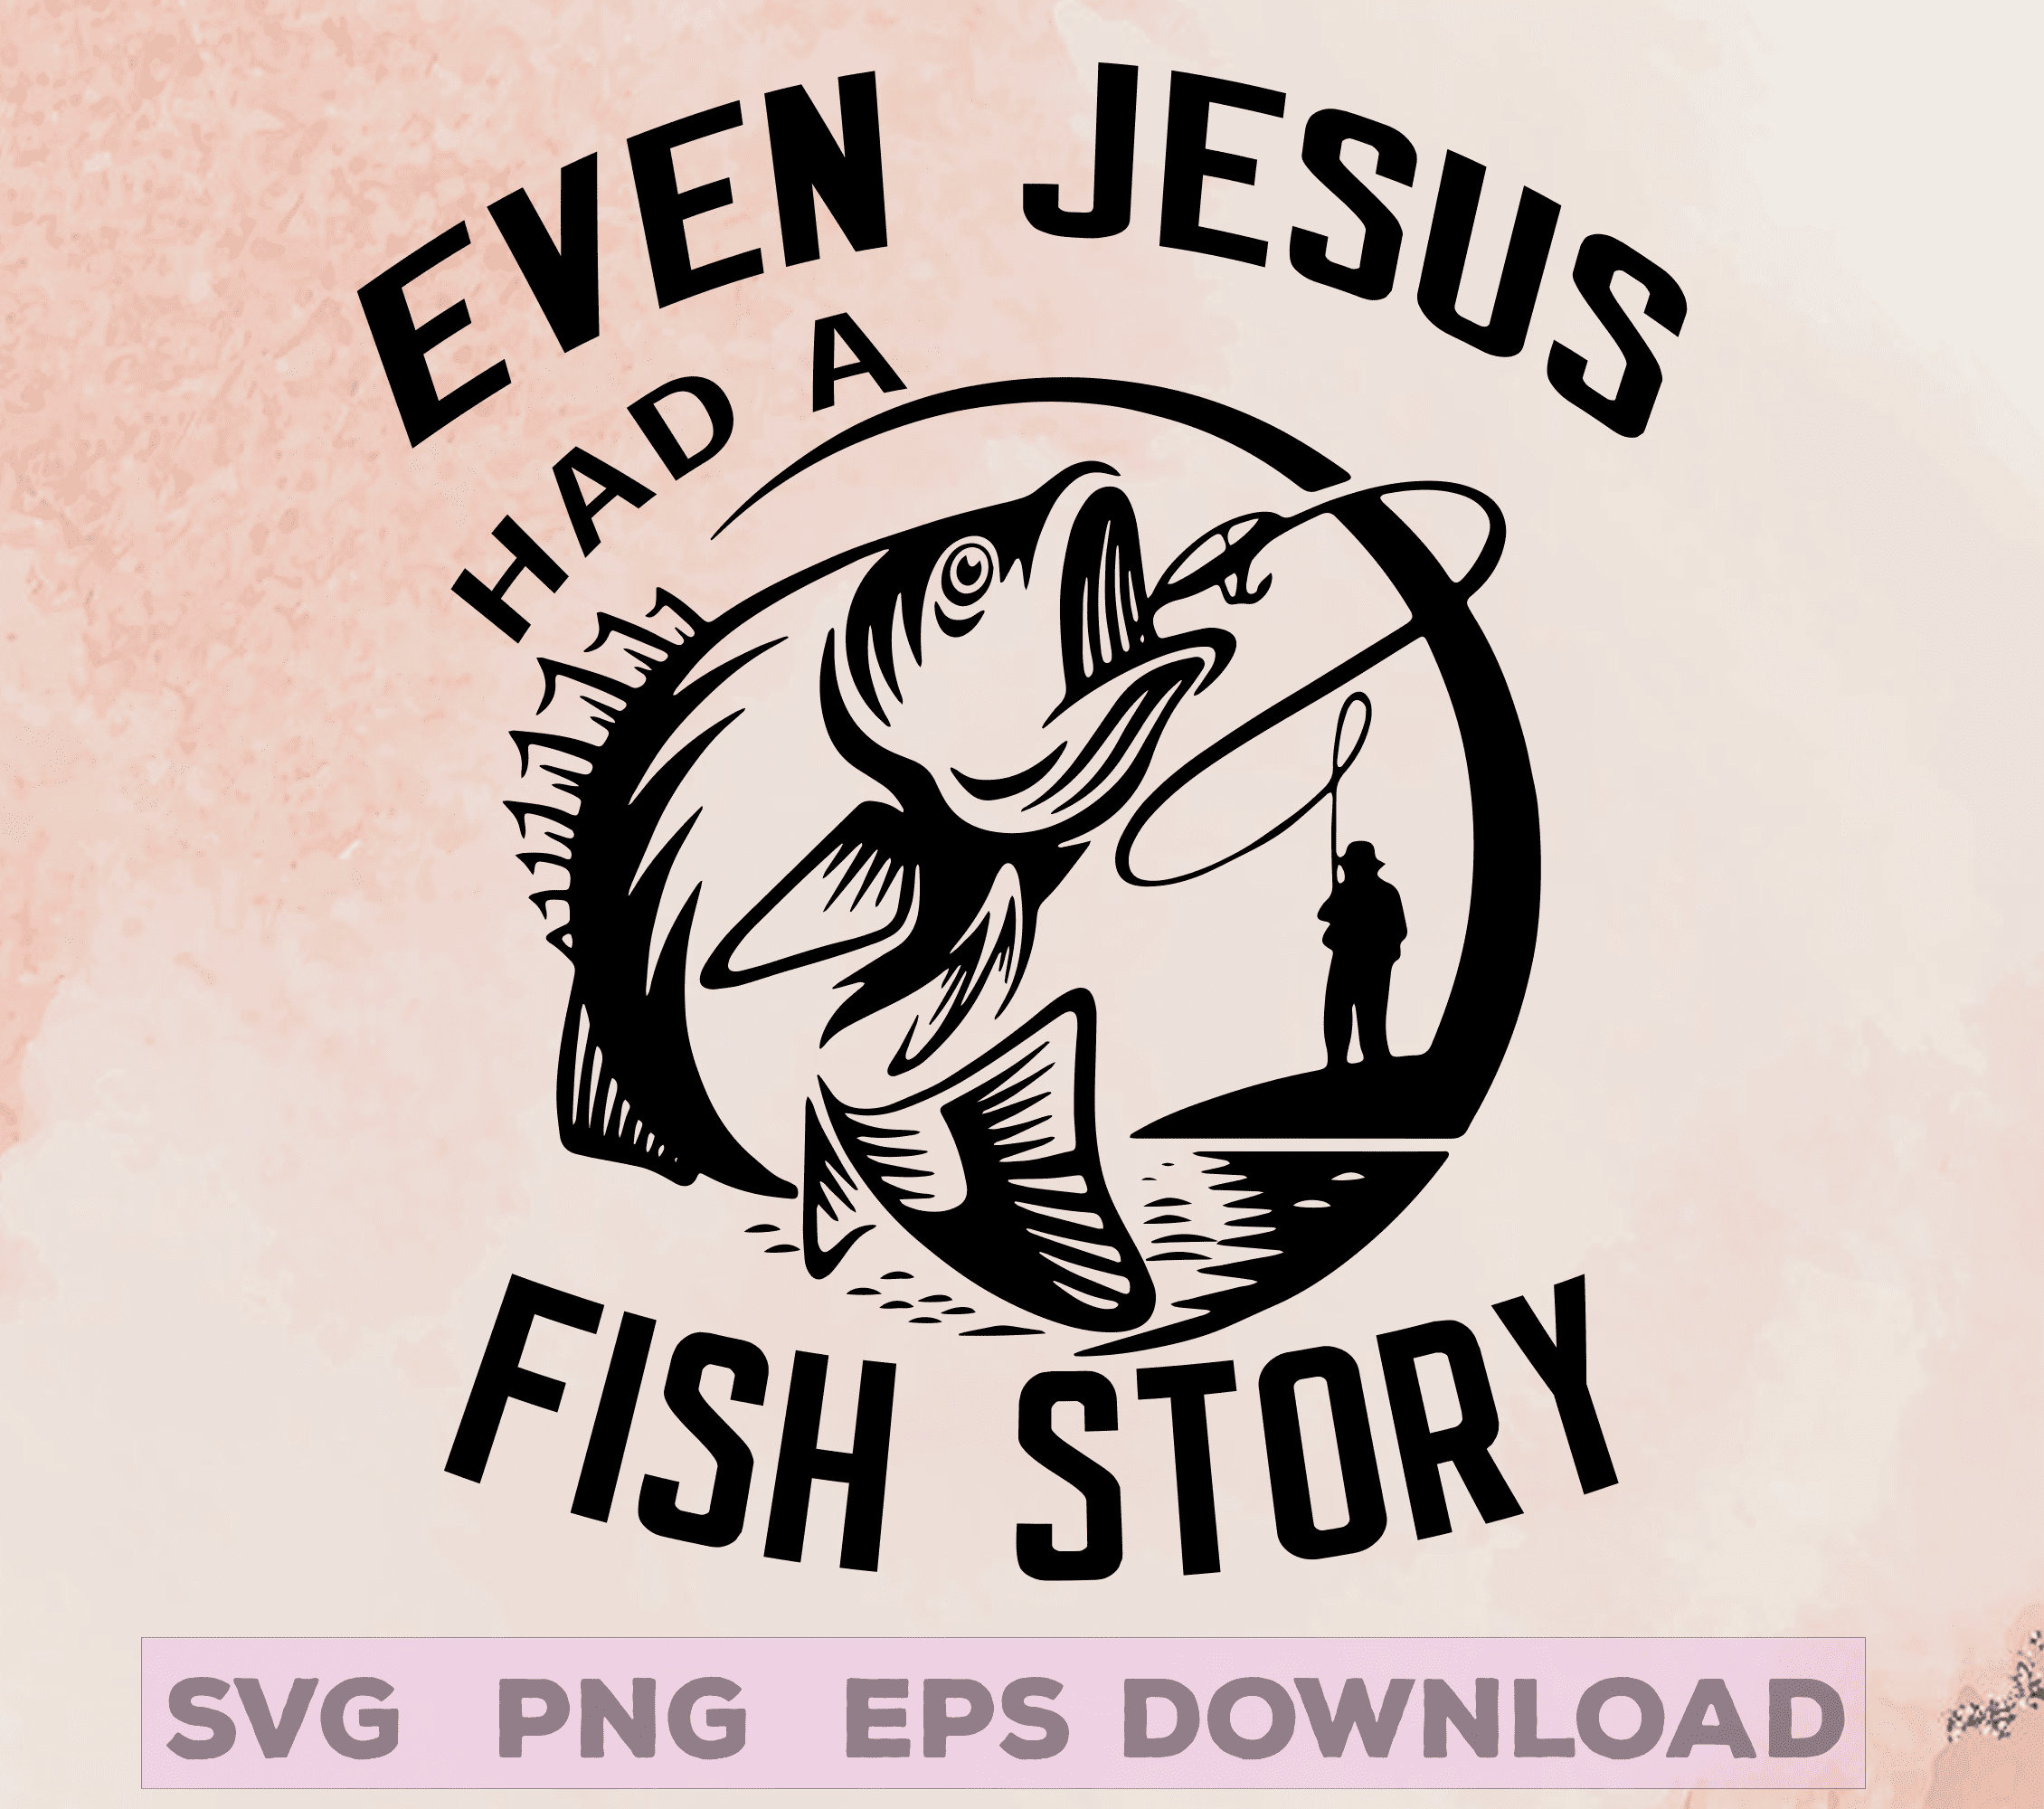 Even Jesus Had a Fishing Story 